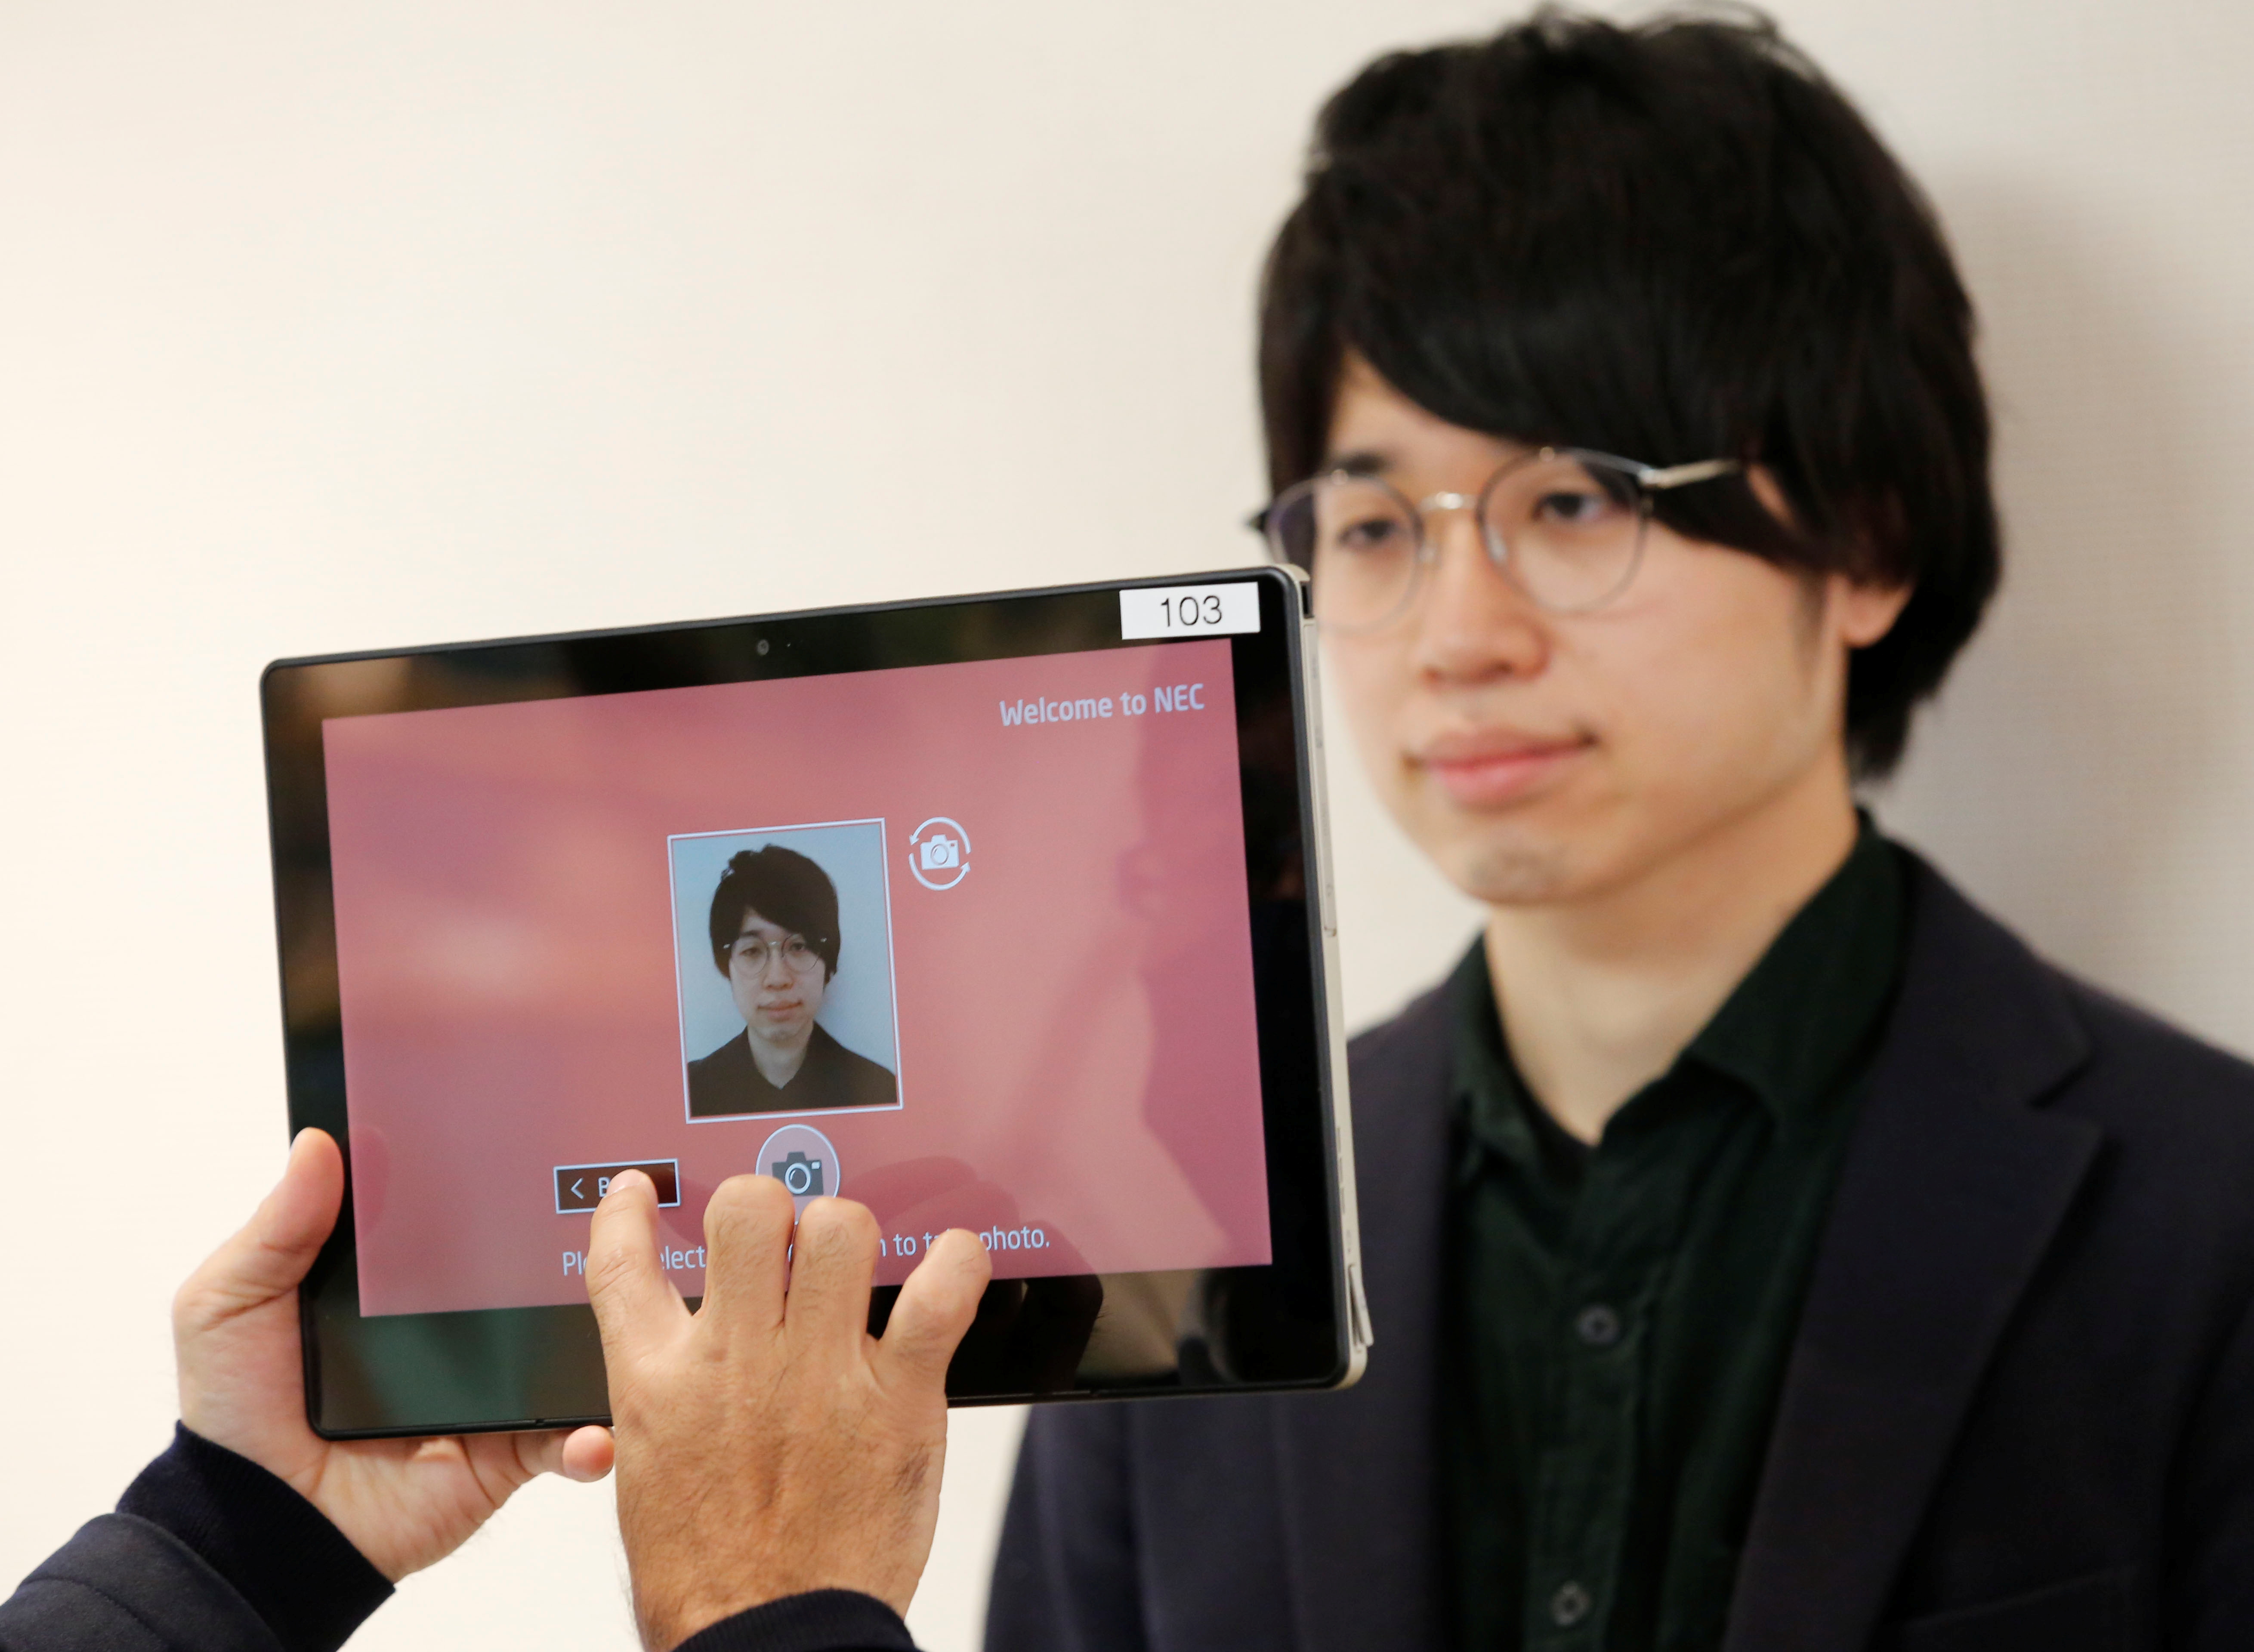 Japan's NEC Corp launches a facial recognition system that identifies people even when they are wearing masks amid the coronavirus disease (COVID-19) outbreak